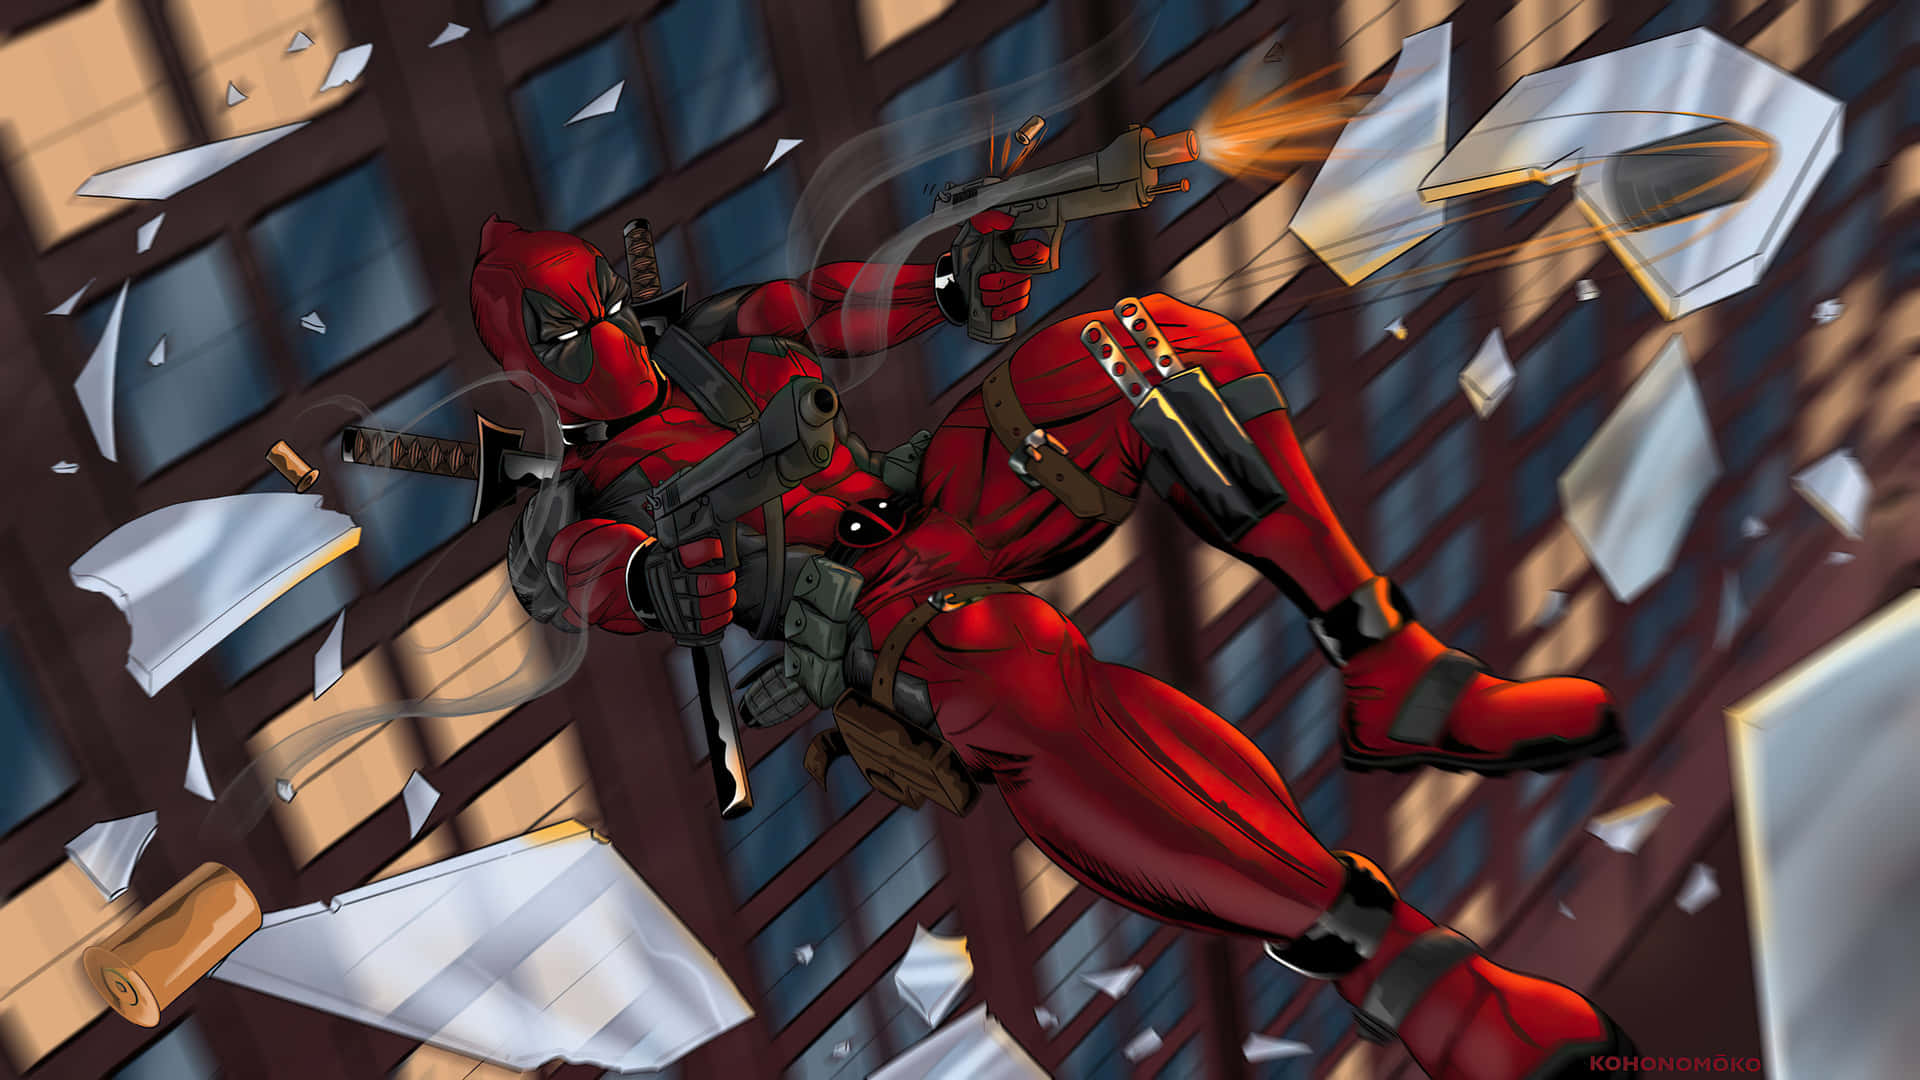 "The Merc with a Mouth, Deadpool"